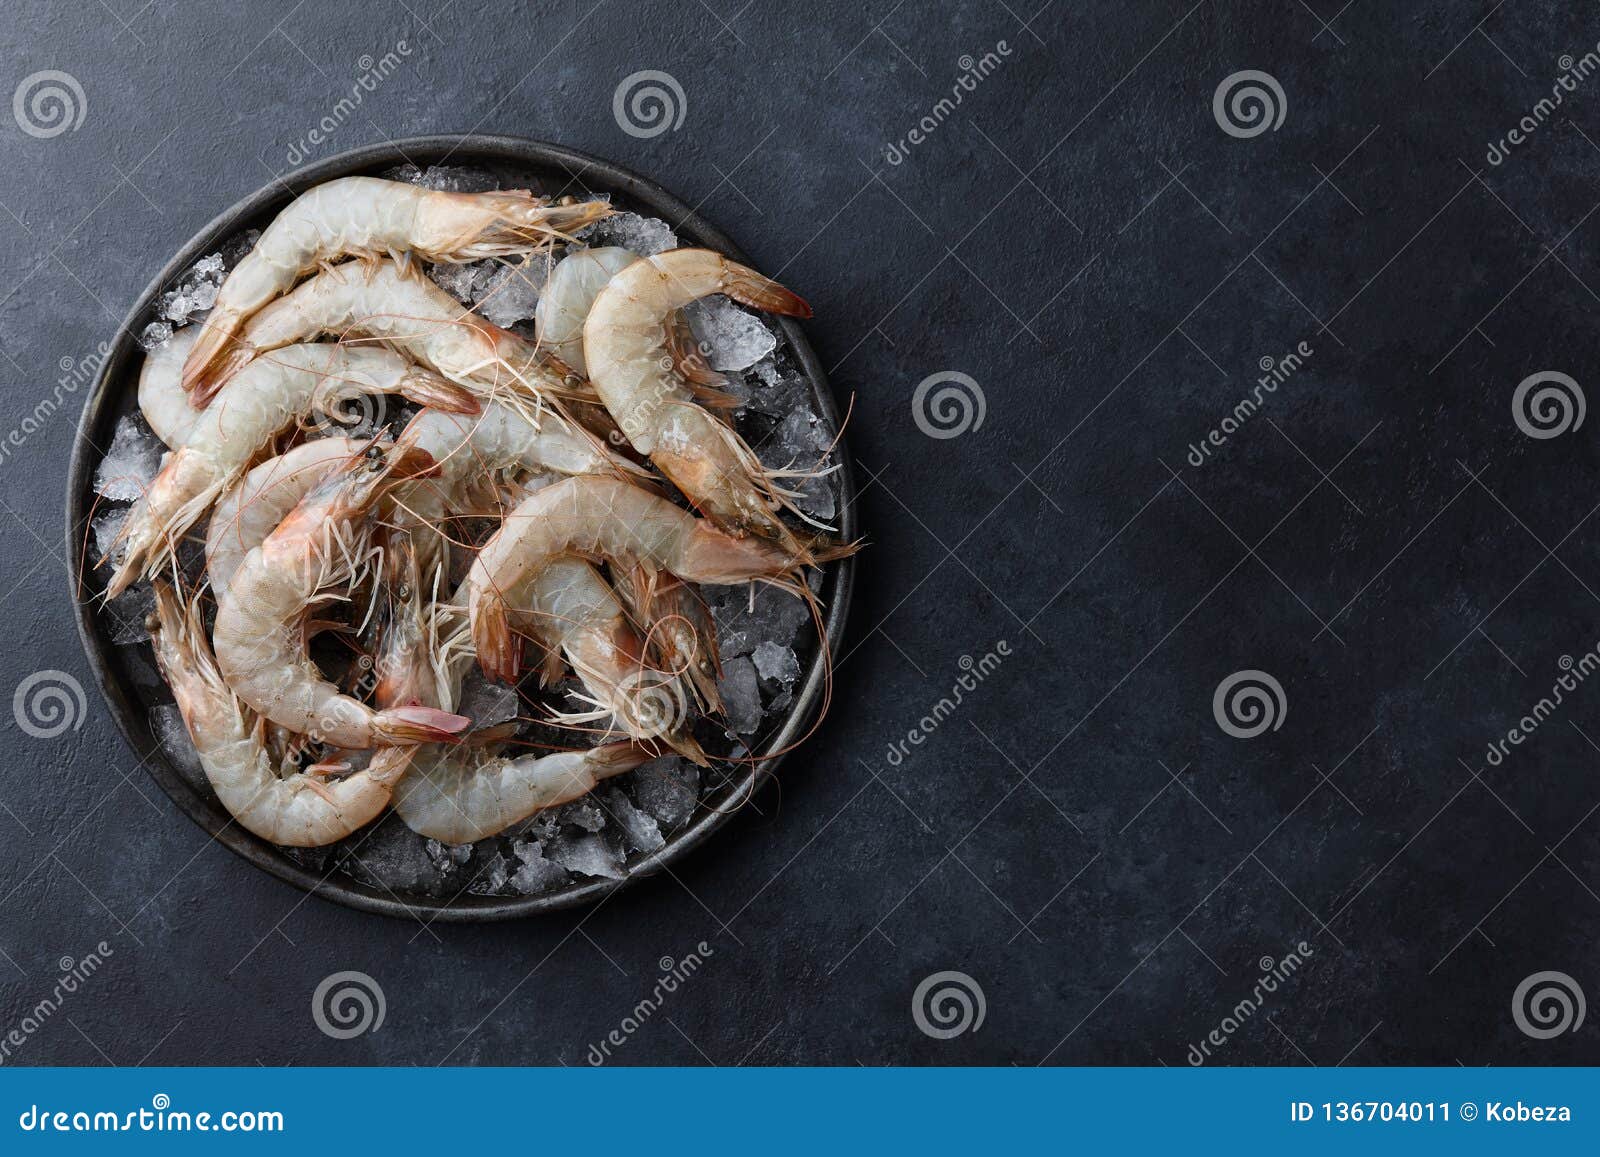 fresh tiger prawns in a plate with ice